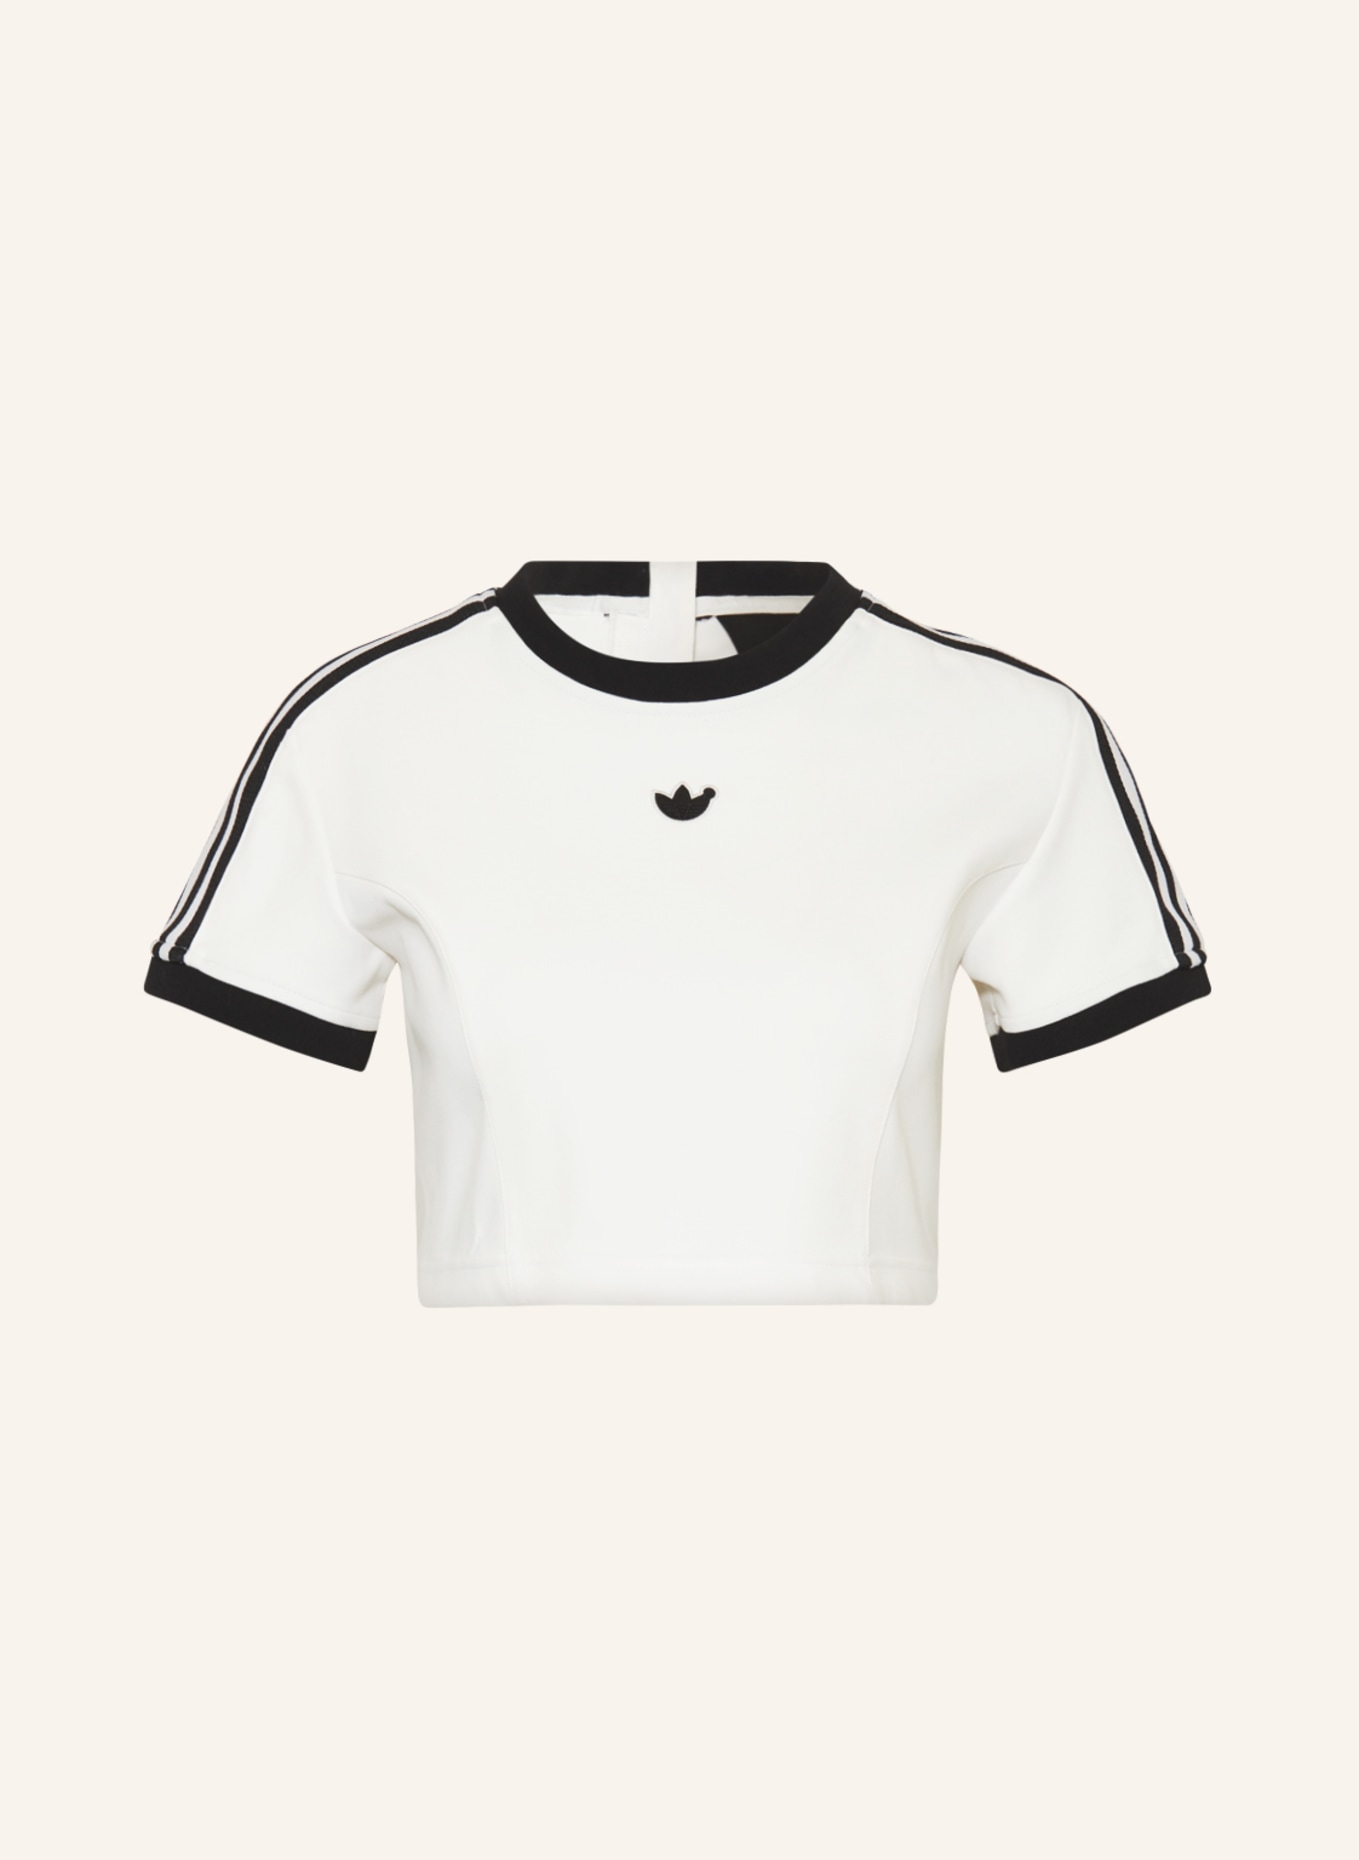 adidas Blue Version Cropped shirt in white